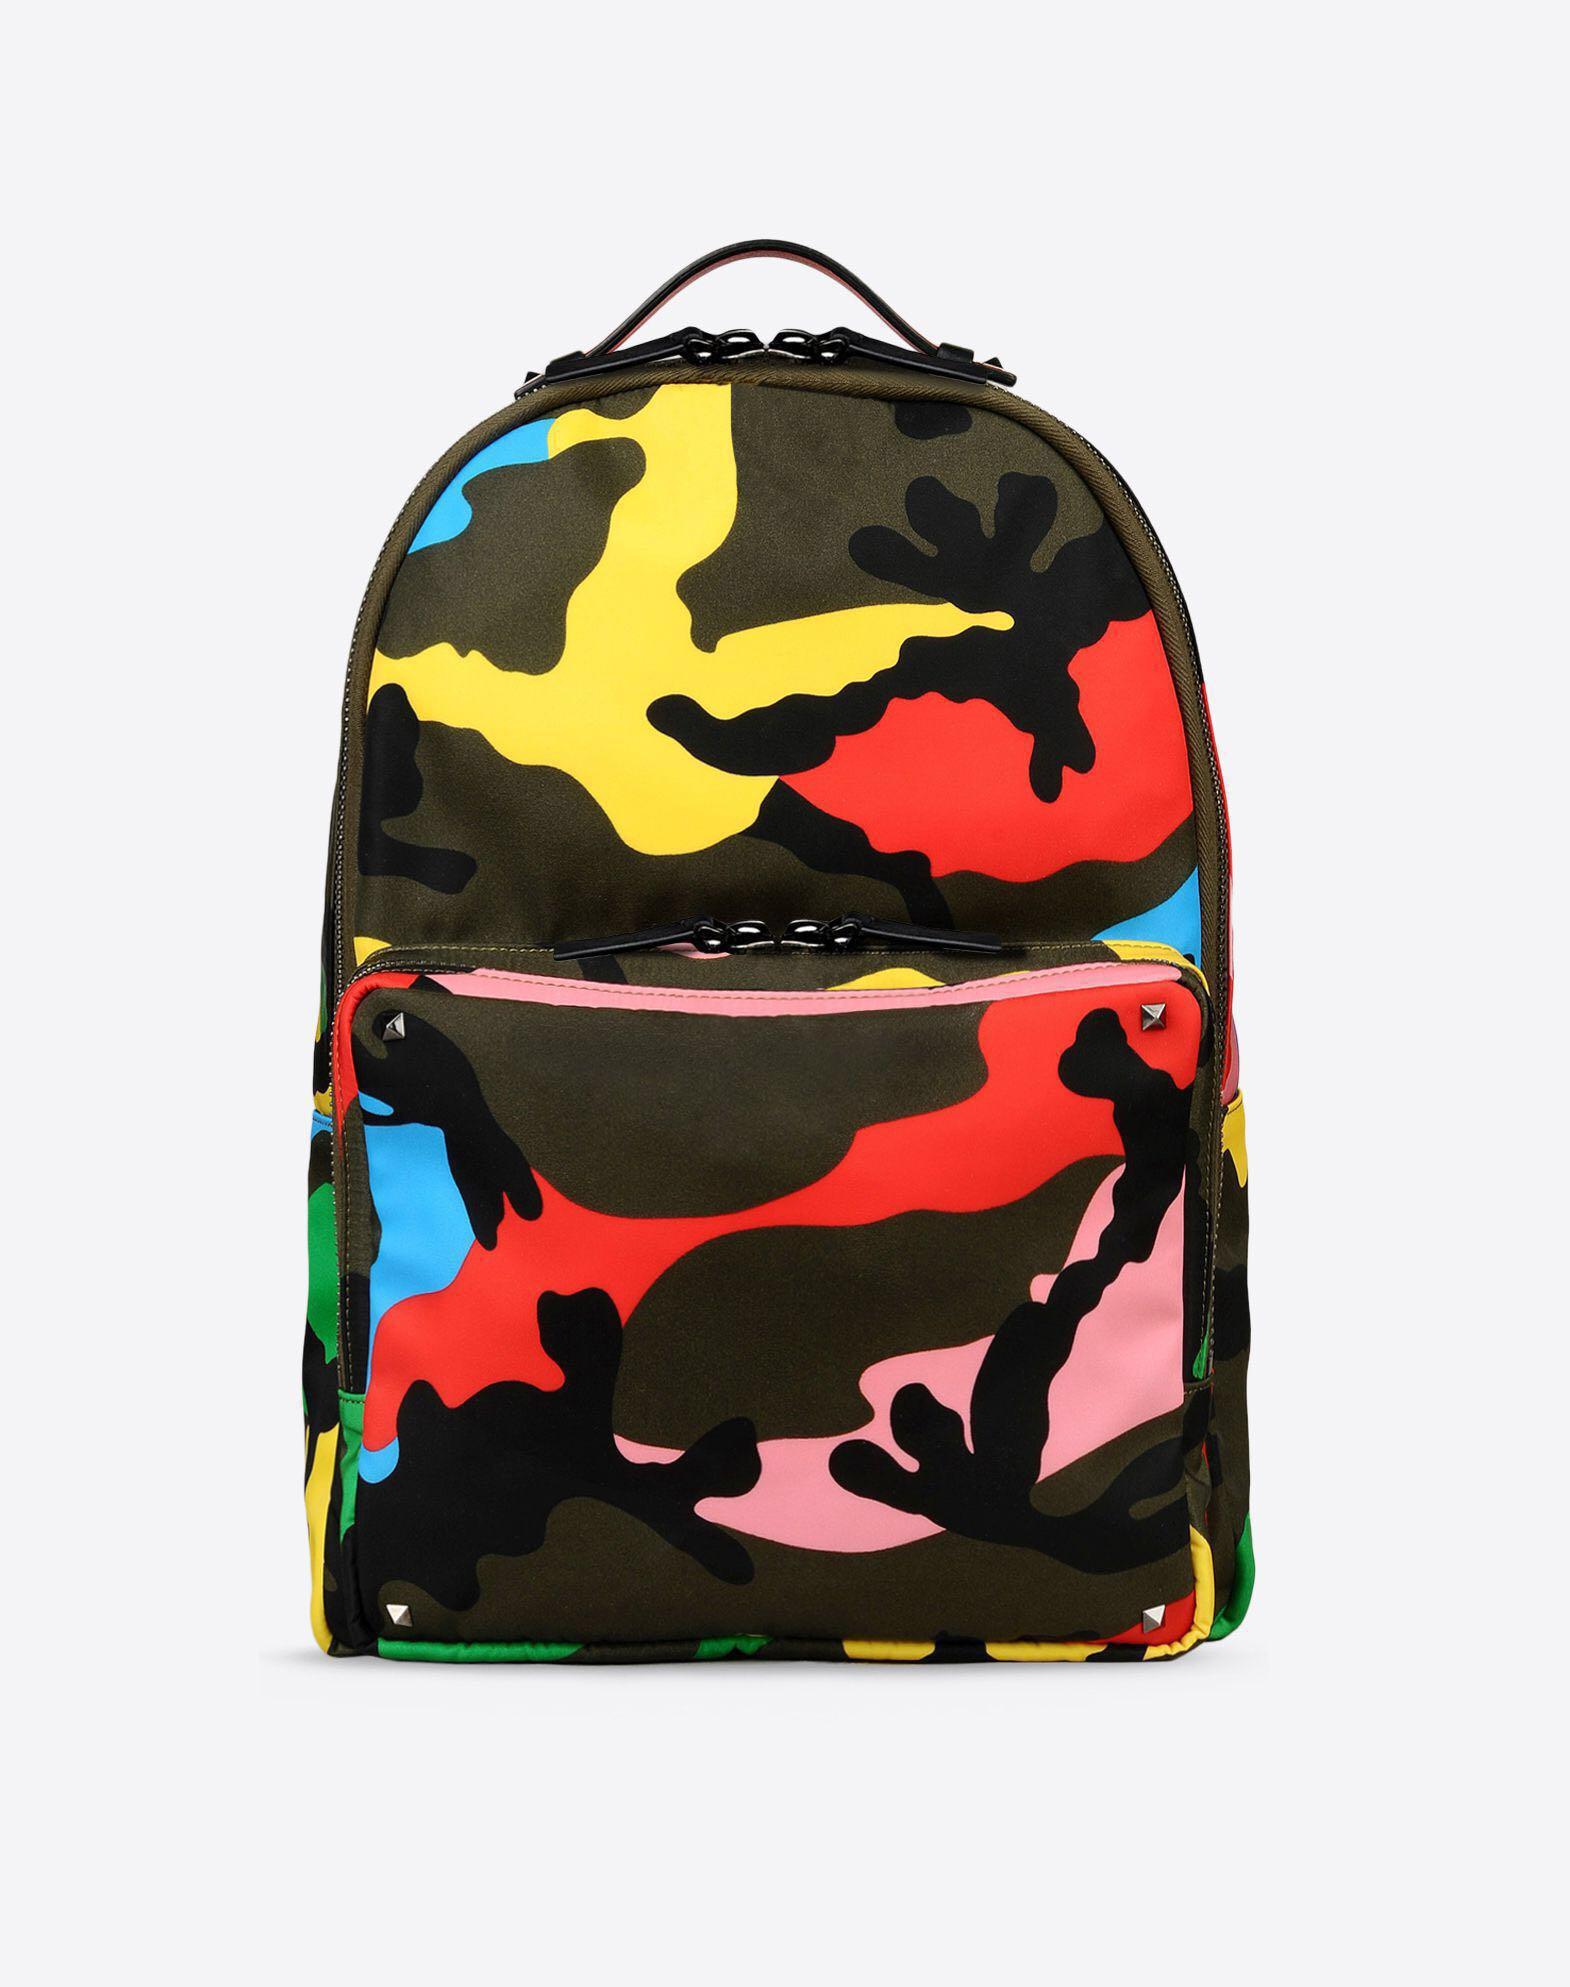 Jet Endeløs Modernisere BN Authentic Valentino Garavani Rockstud Psychedelic camouflage Backpack,  Women's Fashion, Bags & Wallets, Cross-body Bags on Carousell